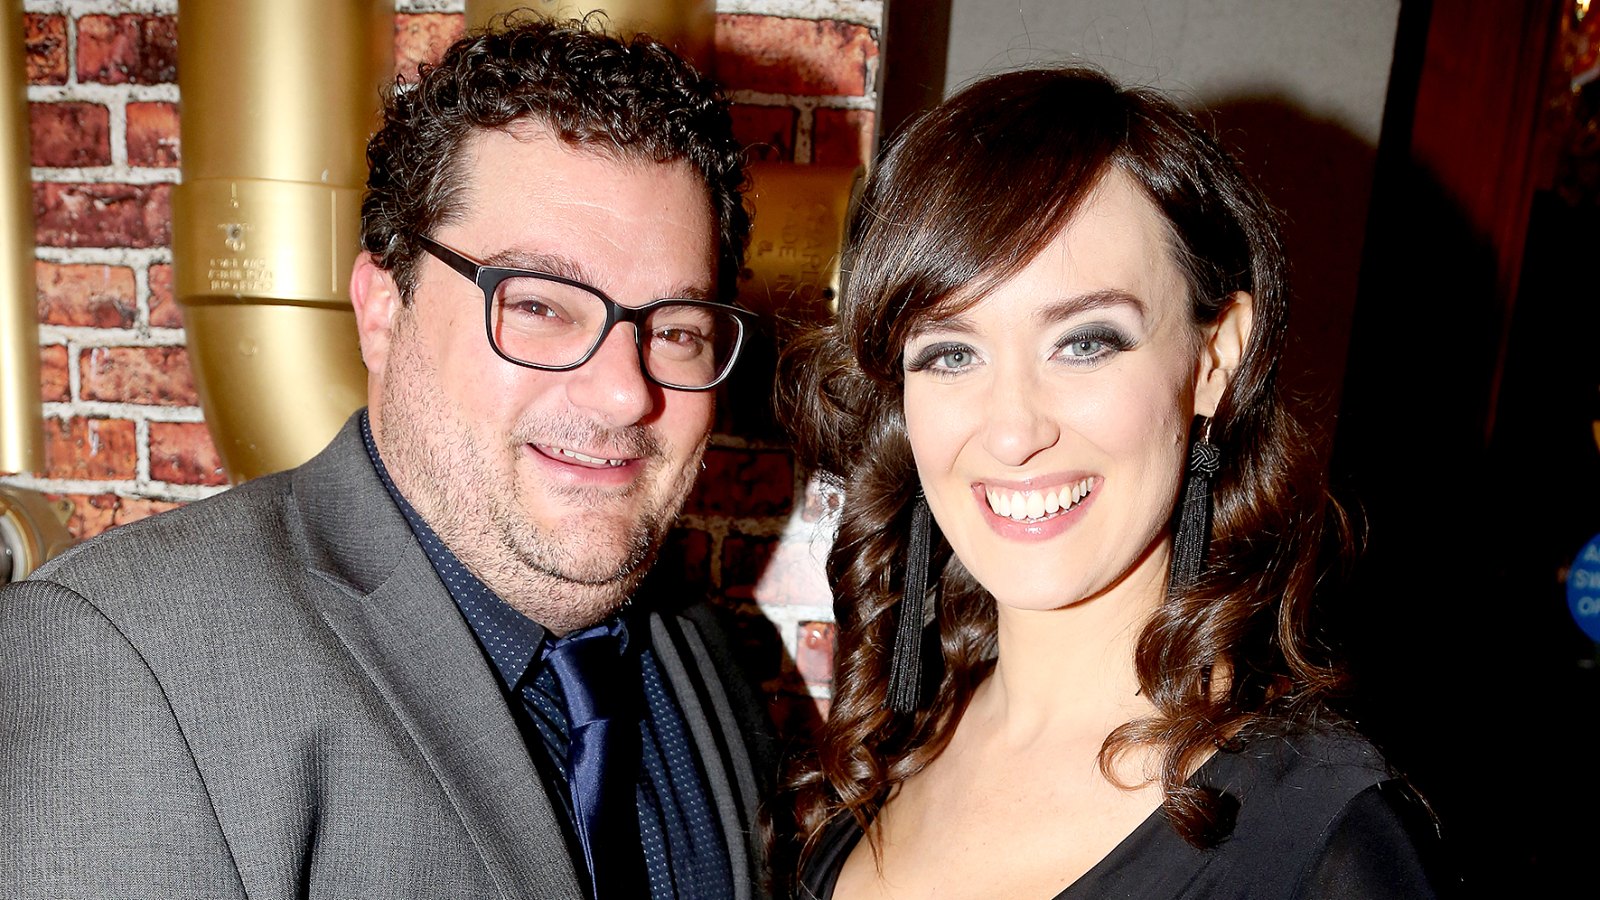 Bobby Moynihan and Brynn O'Malley pose at the opening night of the new musical "Charlie and The Chocolate Factory" on Broadway at The Lunt-Fontanne Theatre on April 23, 2017 in New York City.